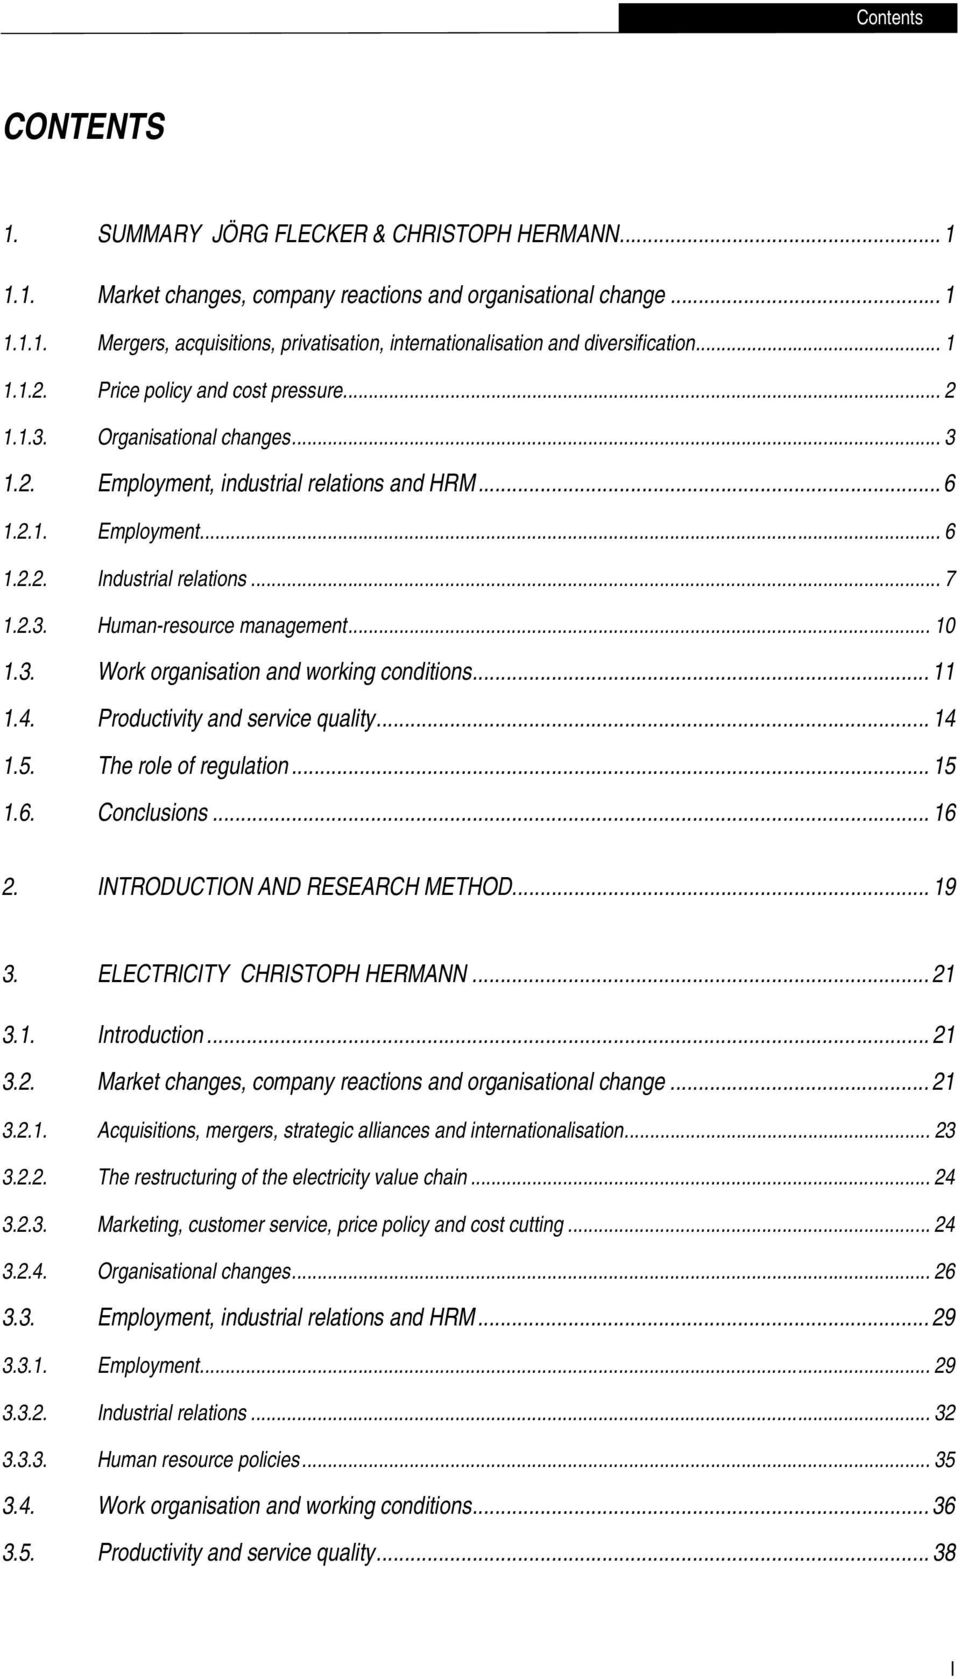 .. 10 1.3. Work organisation and working conditions... 11 1.4. Productivity and service quality... 14 1.5. The role of regulation... 15 1.6. Conclusions... 16 2. INTRODUCTION AND RESEARCH METHOD.